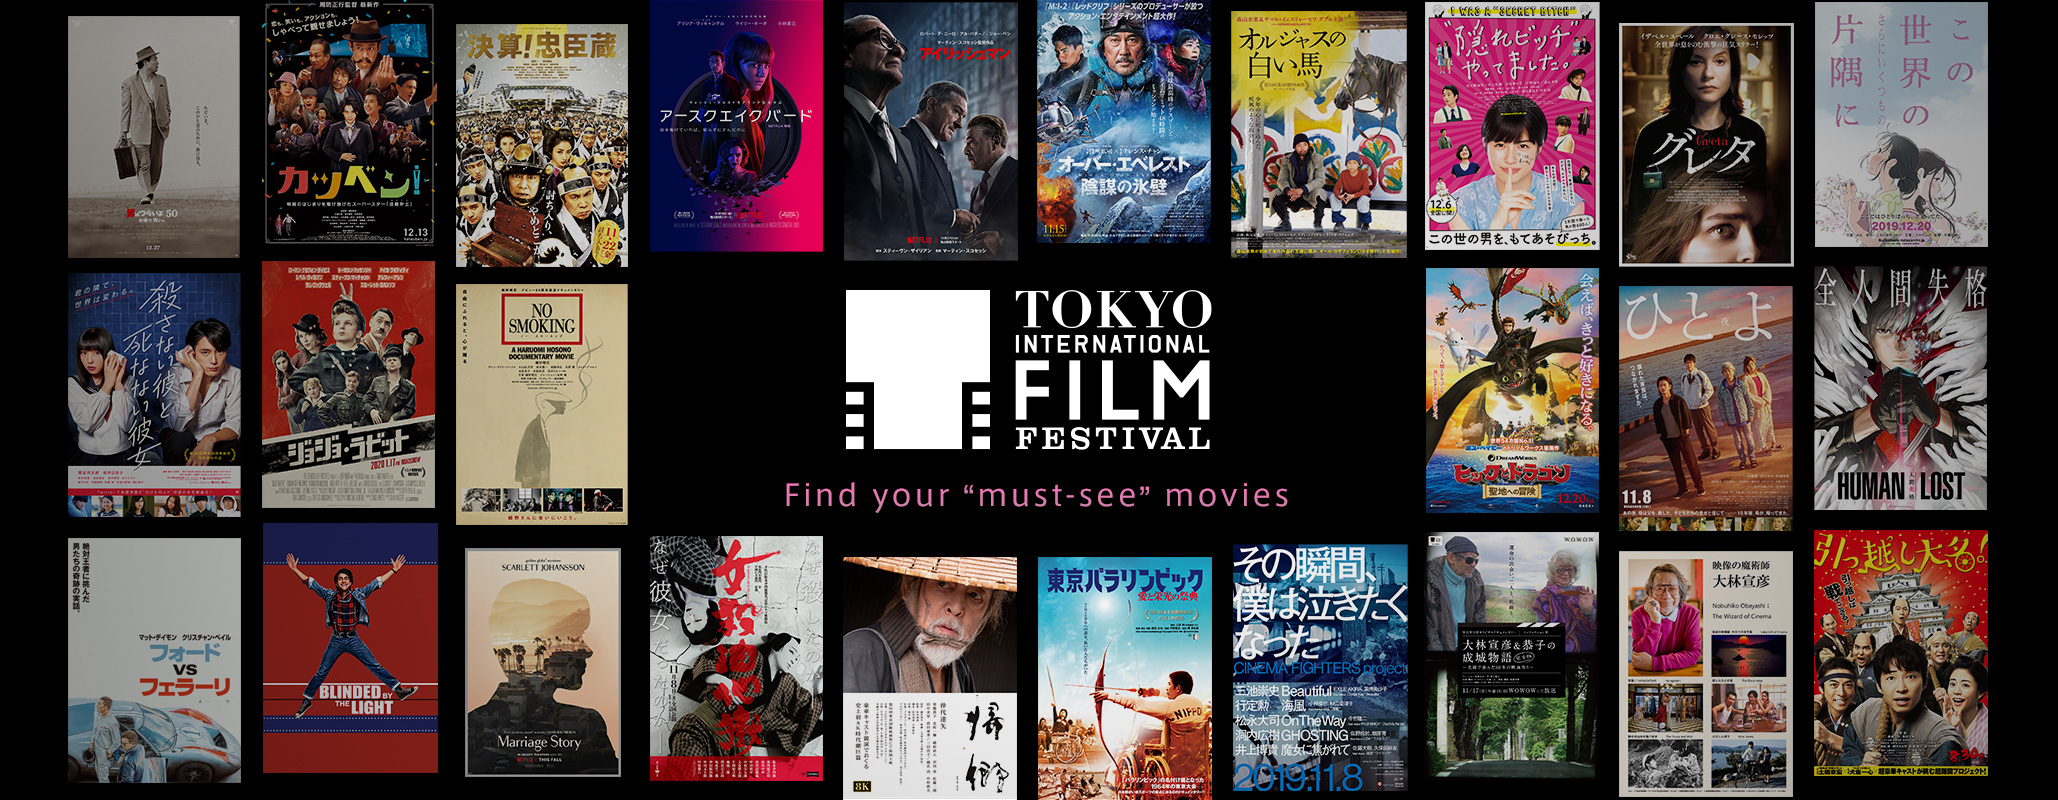 Find your "must-see" movies